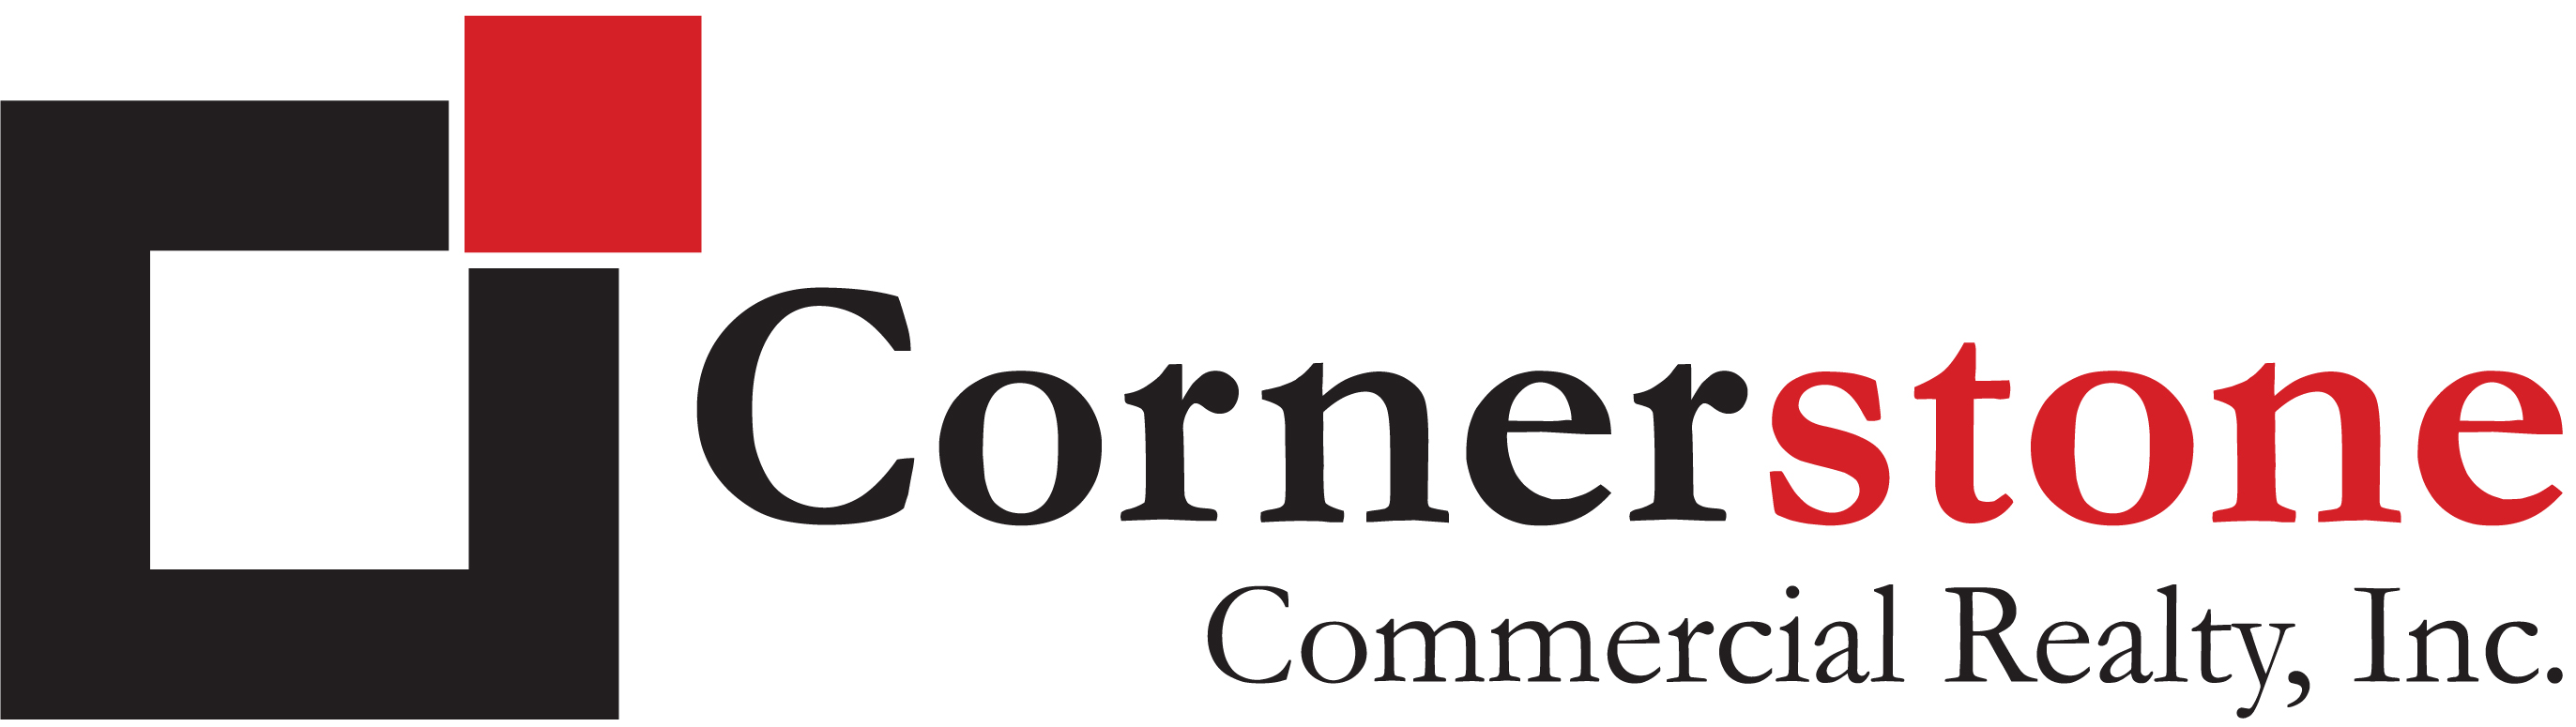 Cornerstone Commerical Realty, Inc.